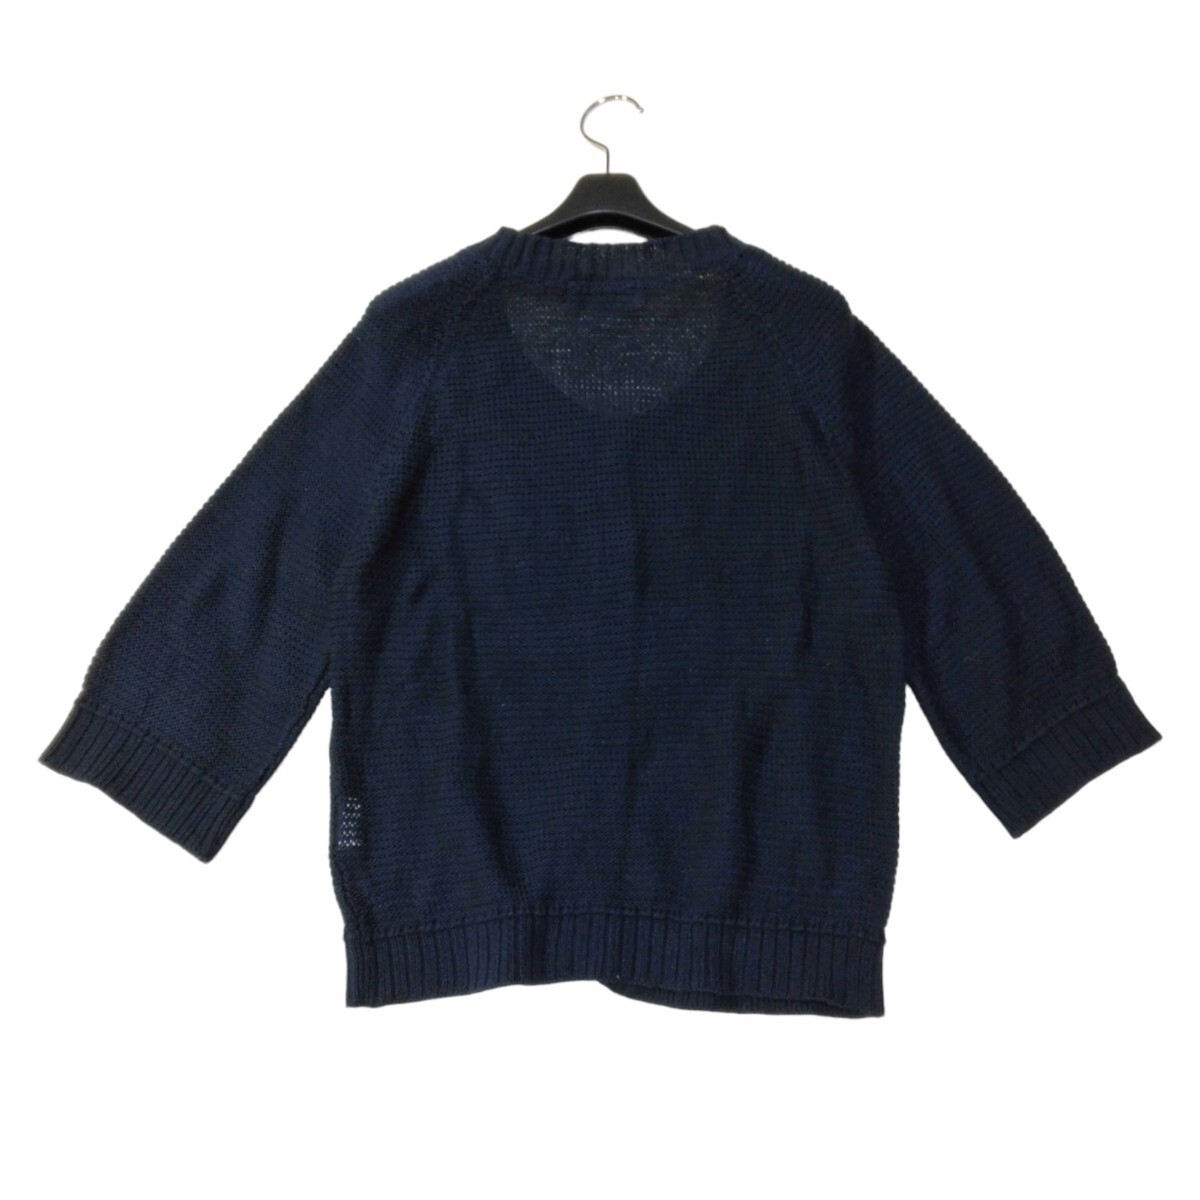 25 [UNTITLED] Untitled knitted cardigan 4 XL L navy navy blue color simple ound-necked sia-.. feeling cotton cotton large size spring summer 